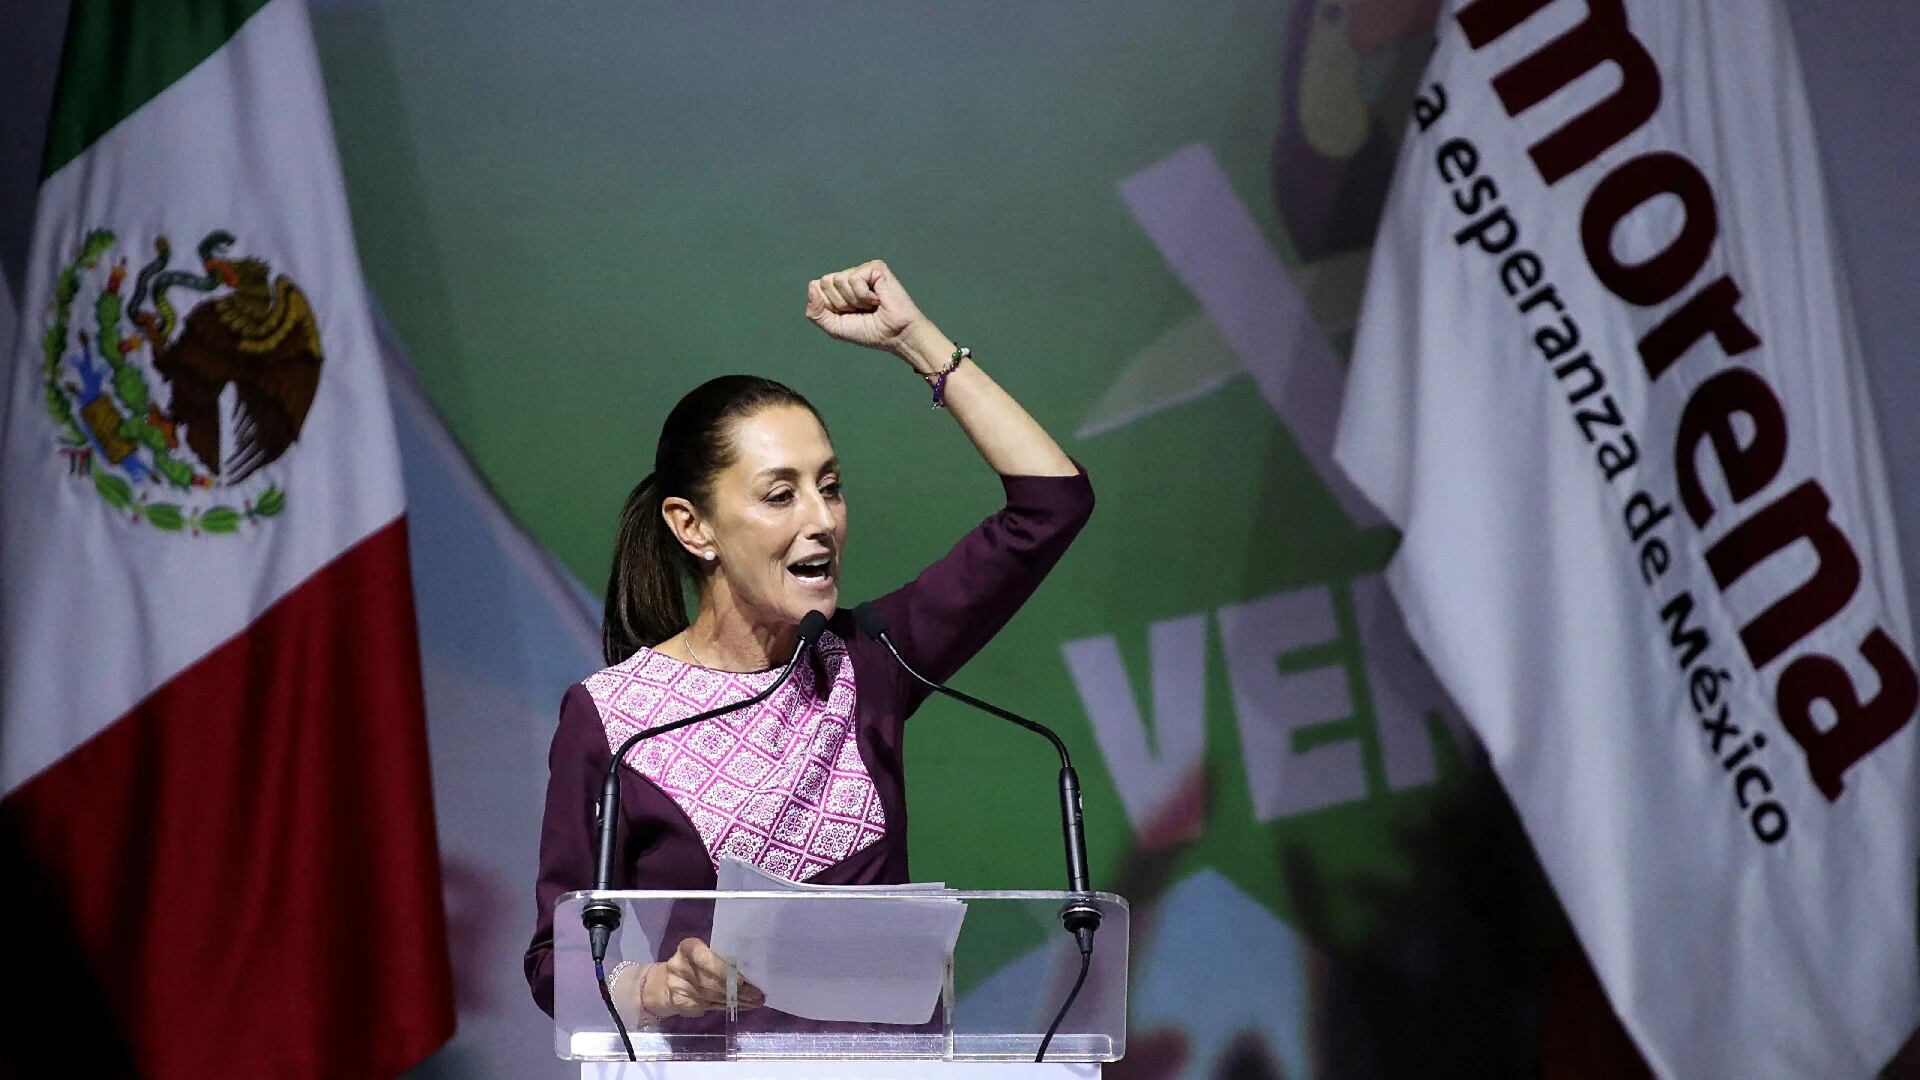 Former Mexico City Mayor Claudia Sheinbaum gestures as she speaks on the day she is certified as presidential candidate for the ruling National Regeneration Movement (MORENA) party during a ceremony, in Mexico City, Mexico September 10, 2023. REUTERS/Henry Romero